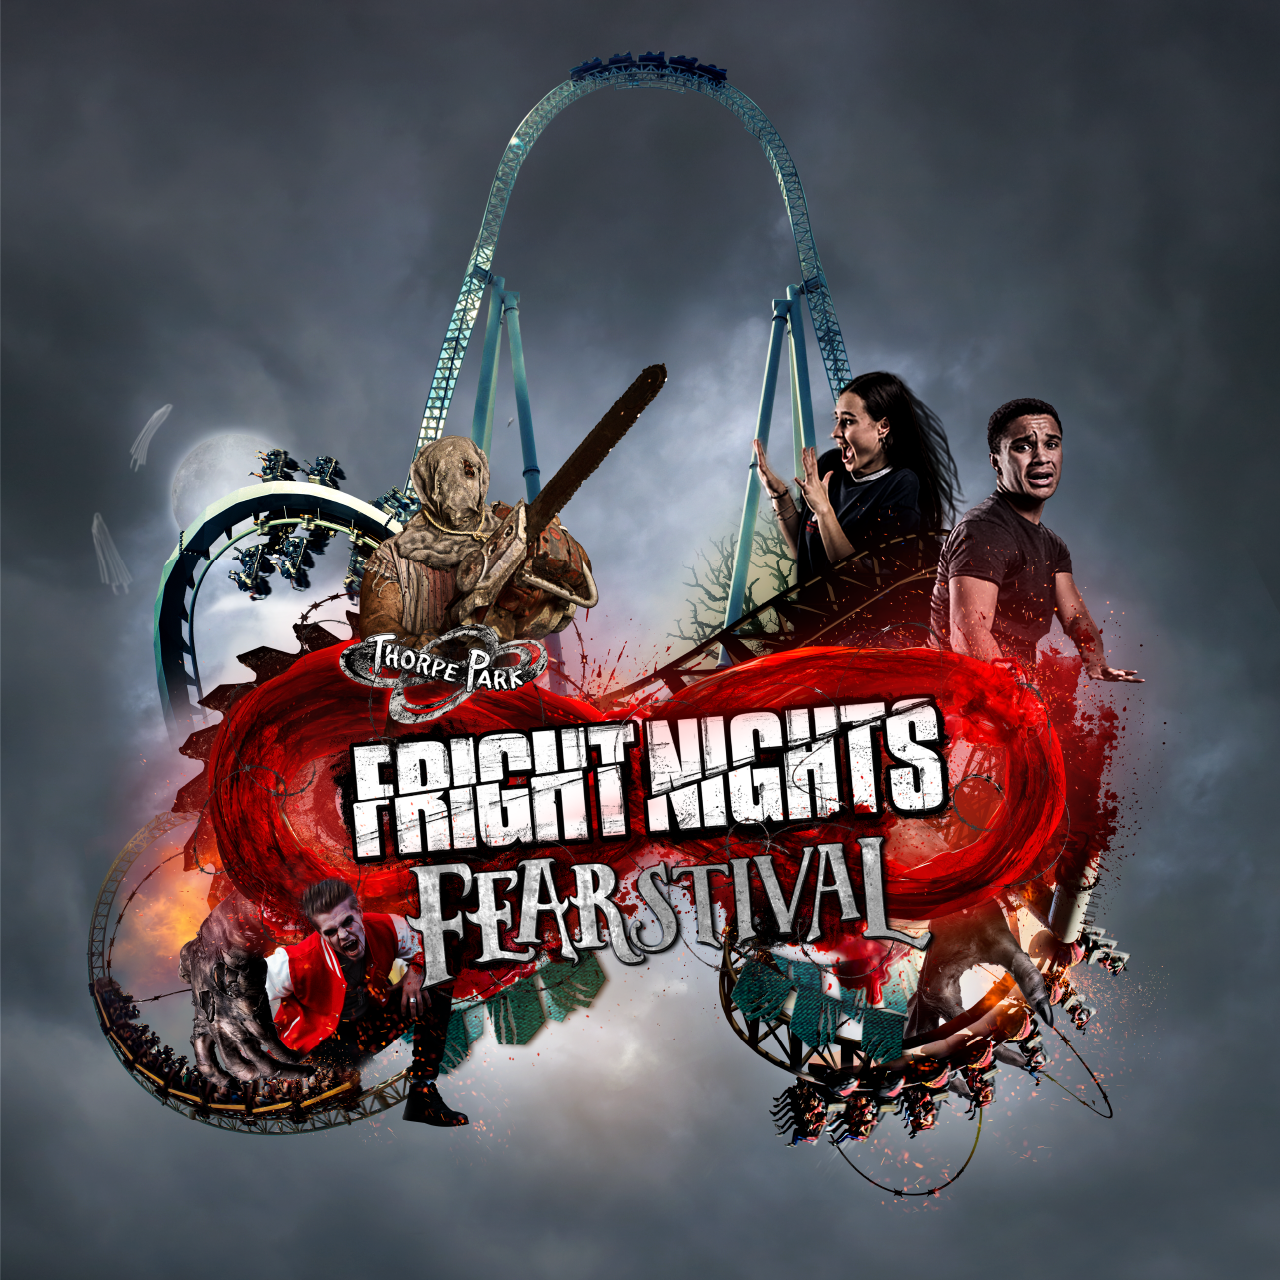 Fright Nights Fearstival